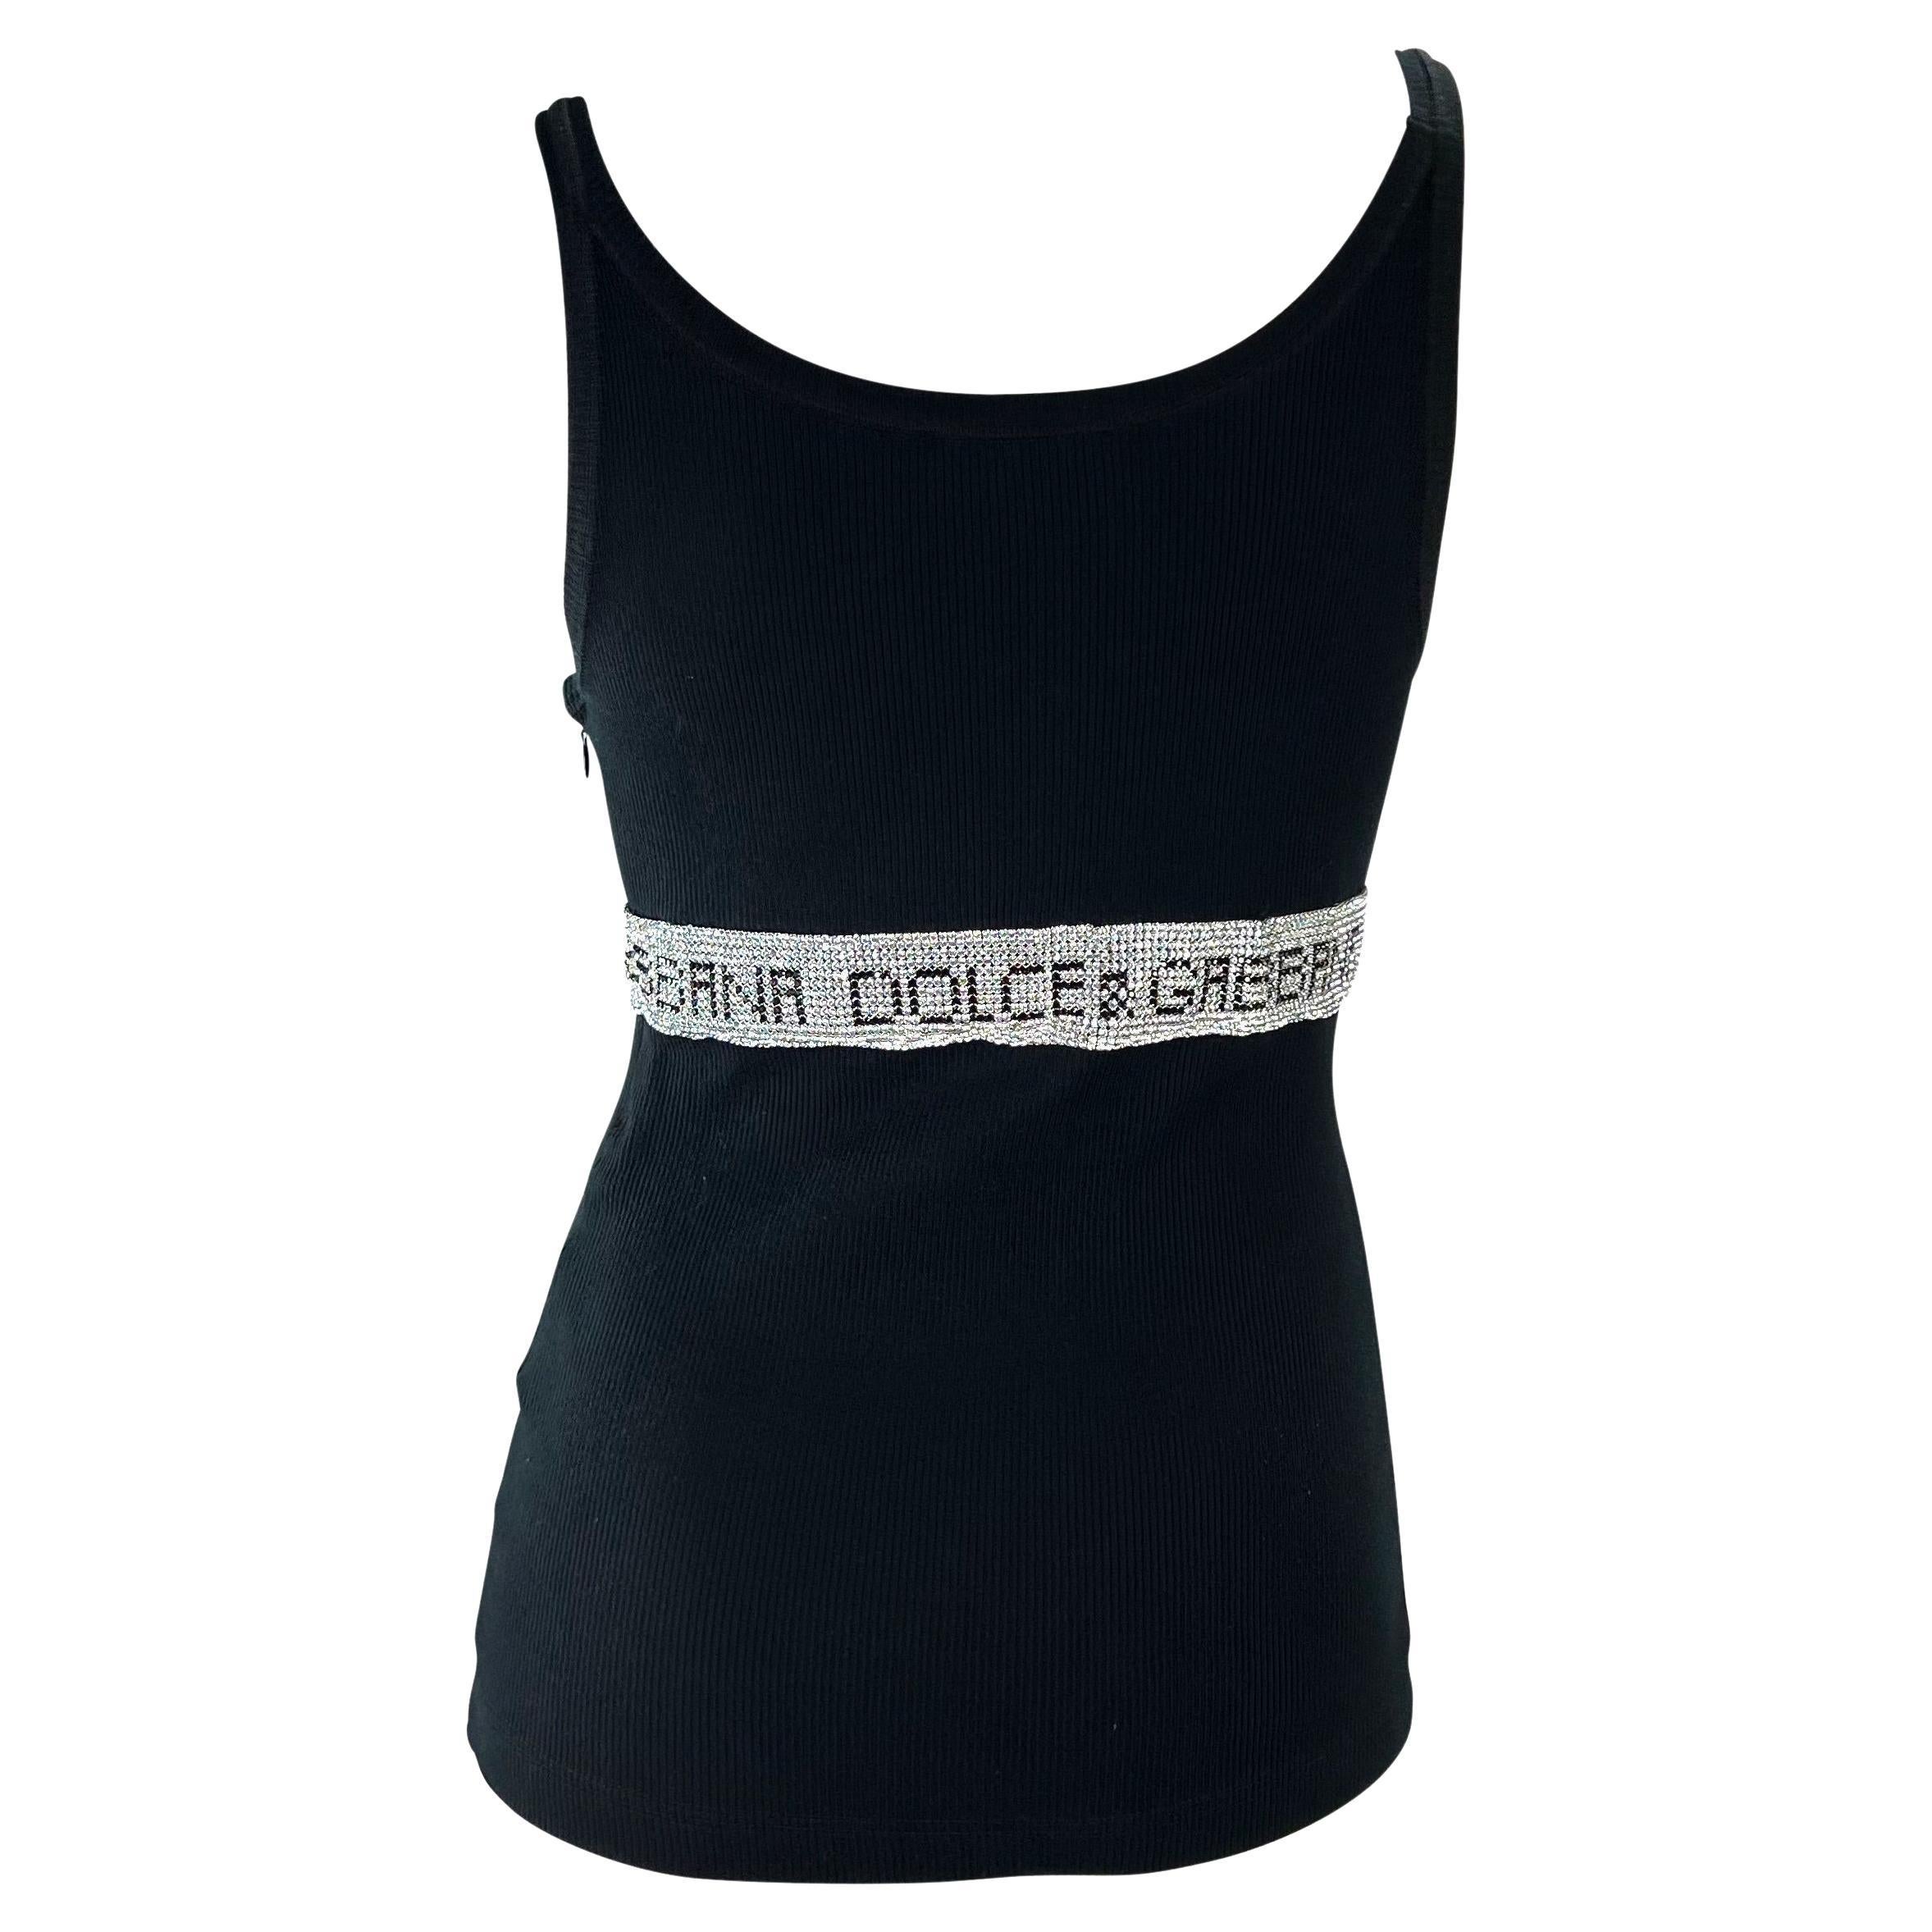 2000s Dolce & Gabbana Rhinestone Logo Black Ribbed Stretch Tank Top In Good Condition For Sale In West Hollywood, CA